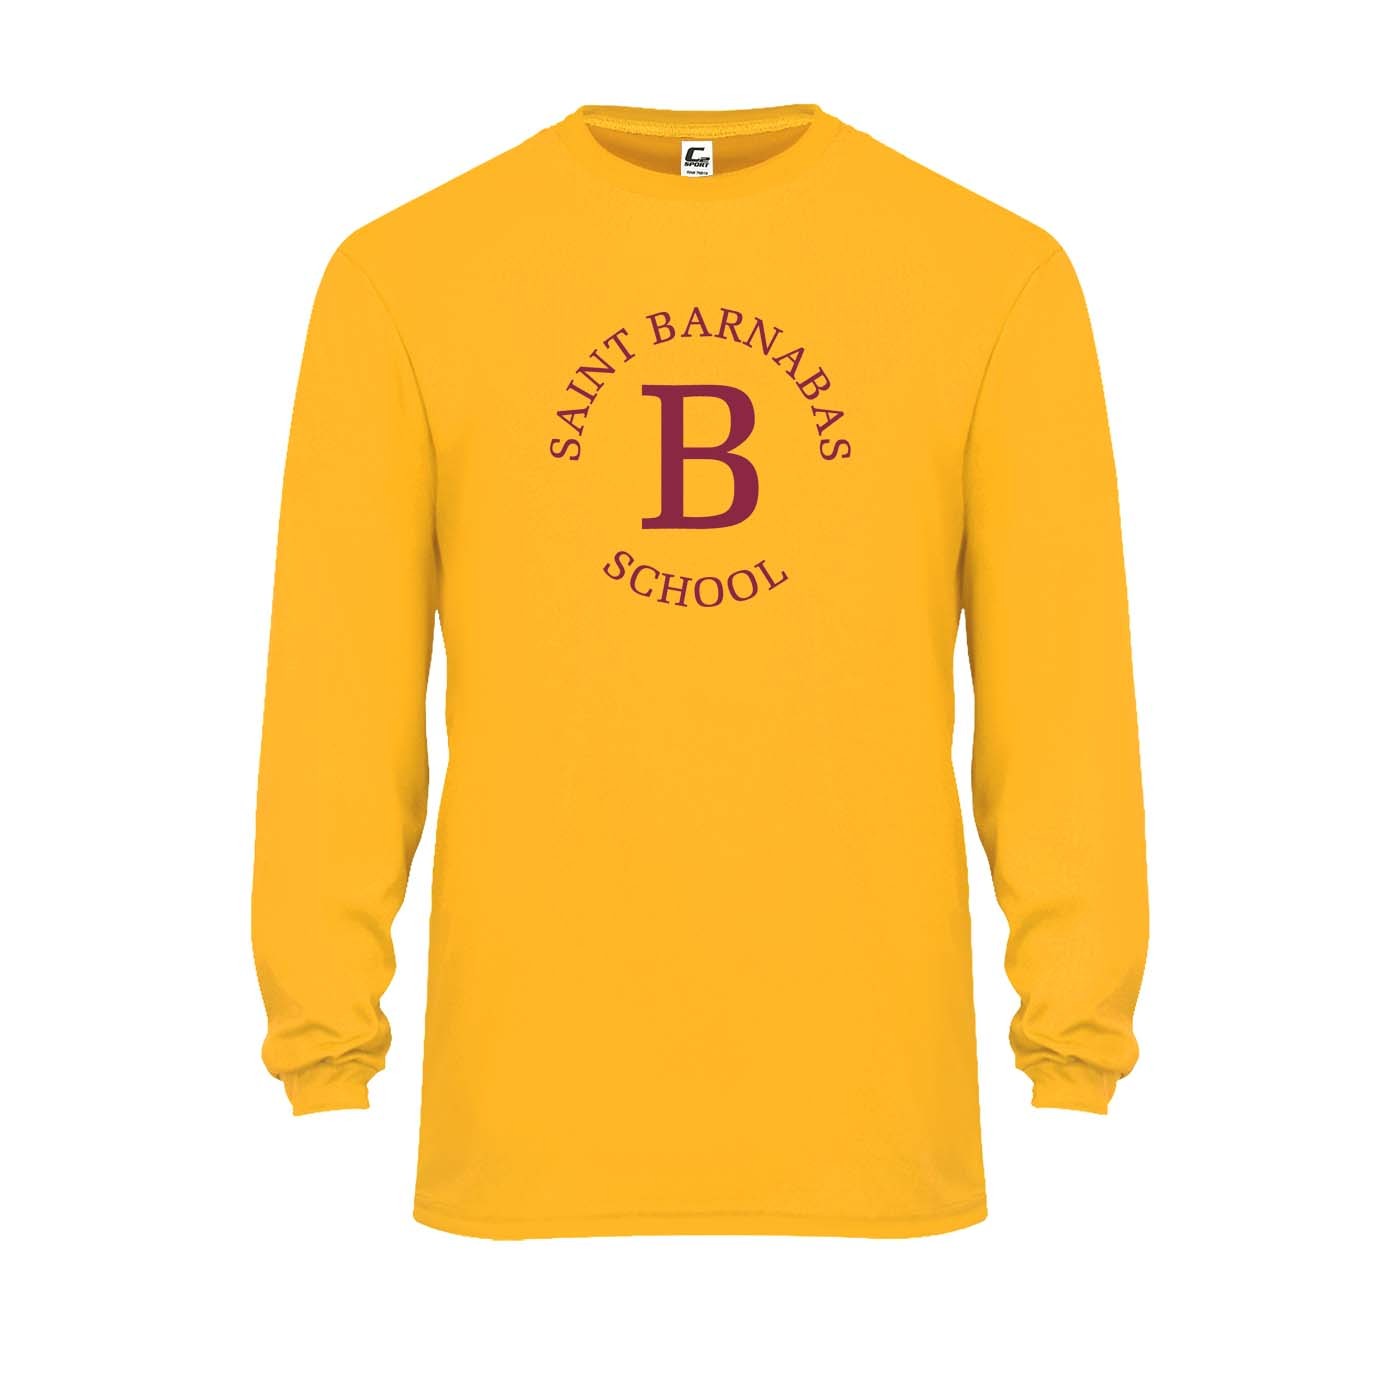 SBS L/S Spirit Performance T-Shirt w/ Maroon Logo - Please Allow 2-3 Weeks for Delivery